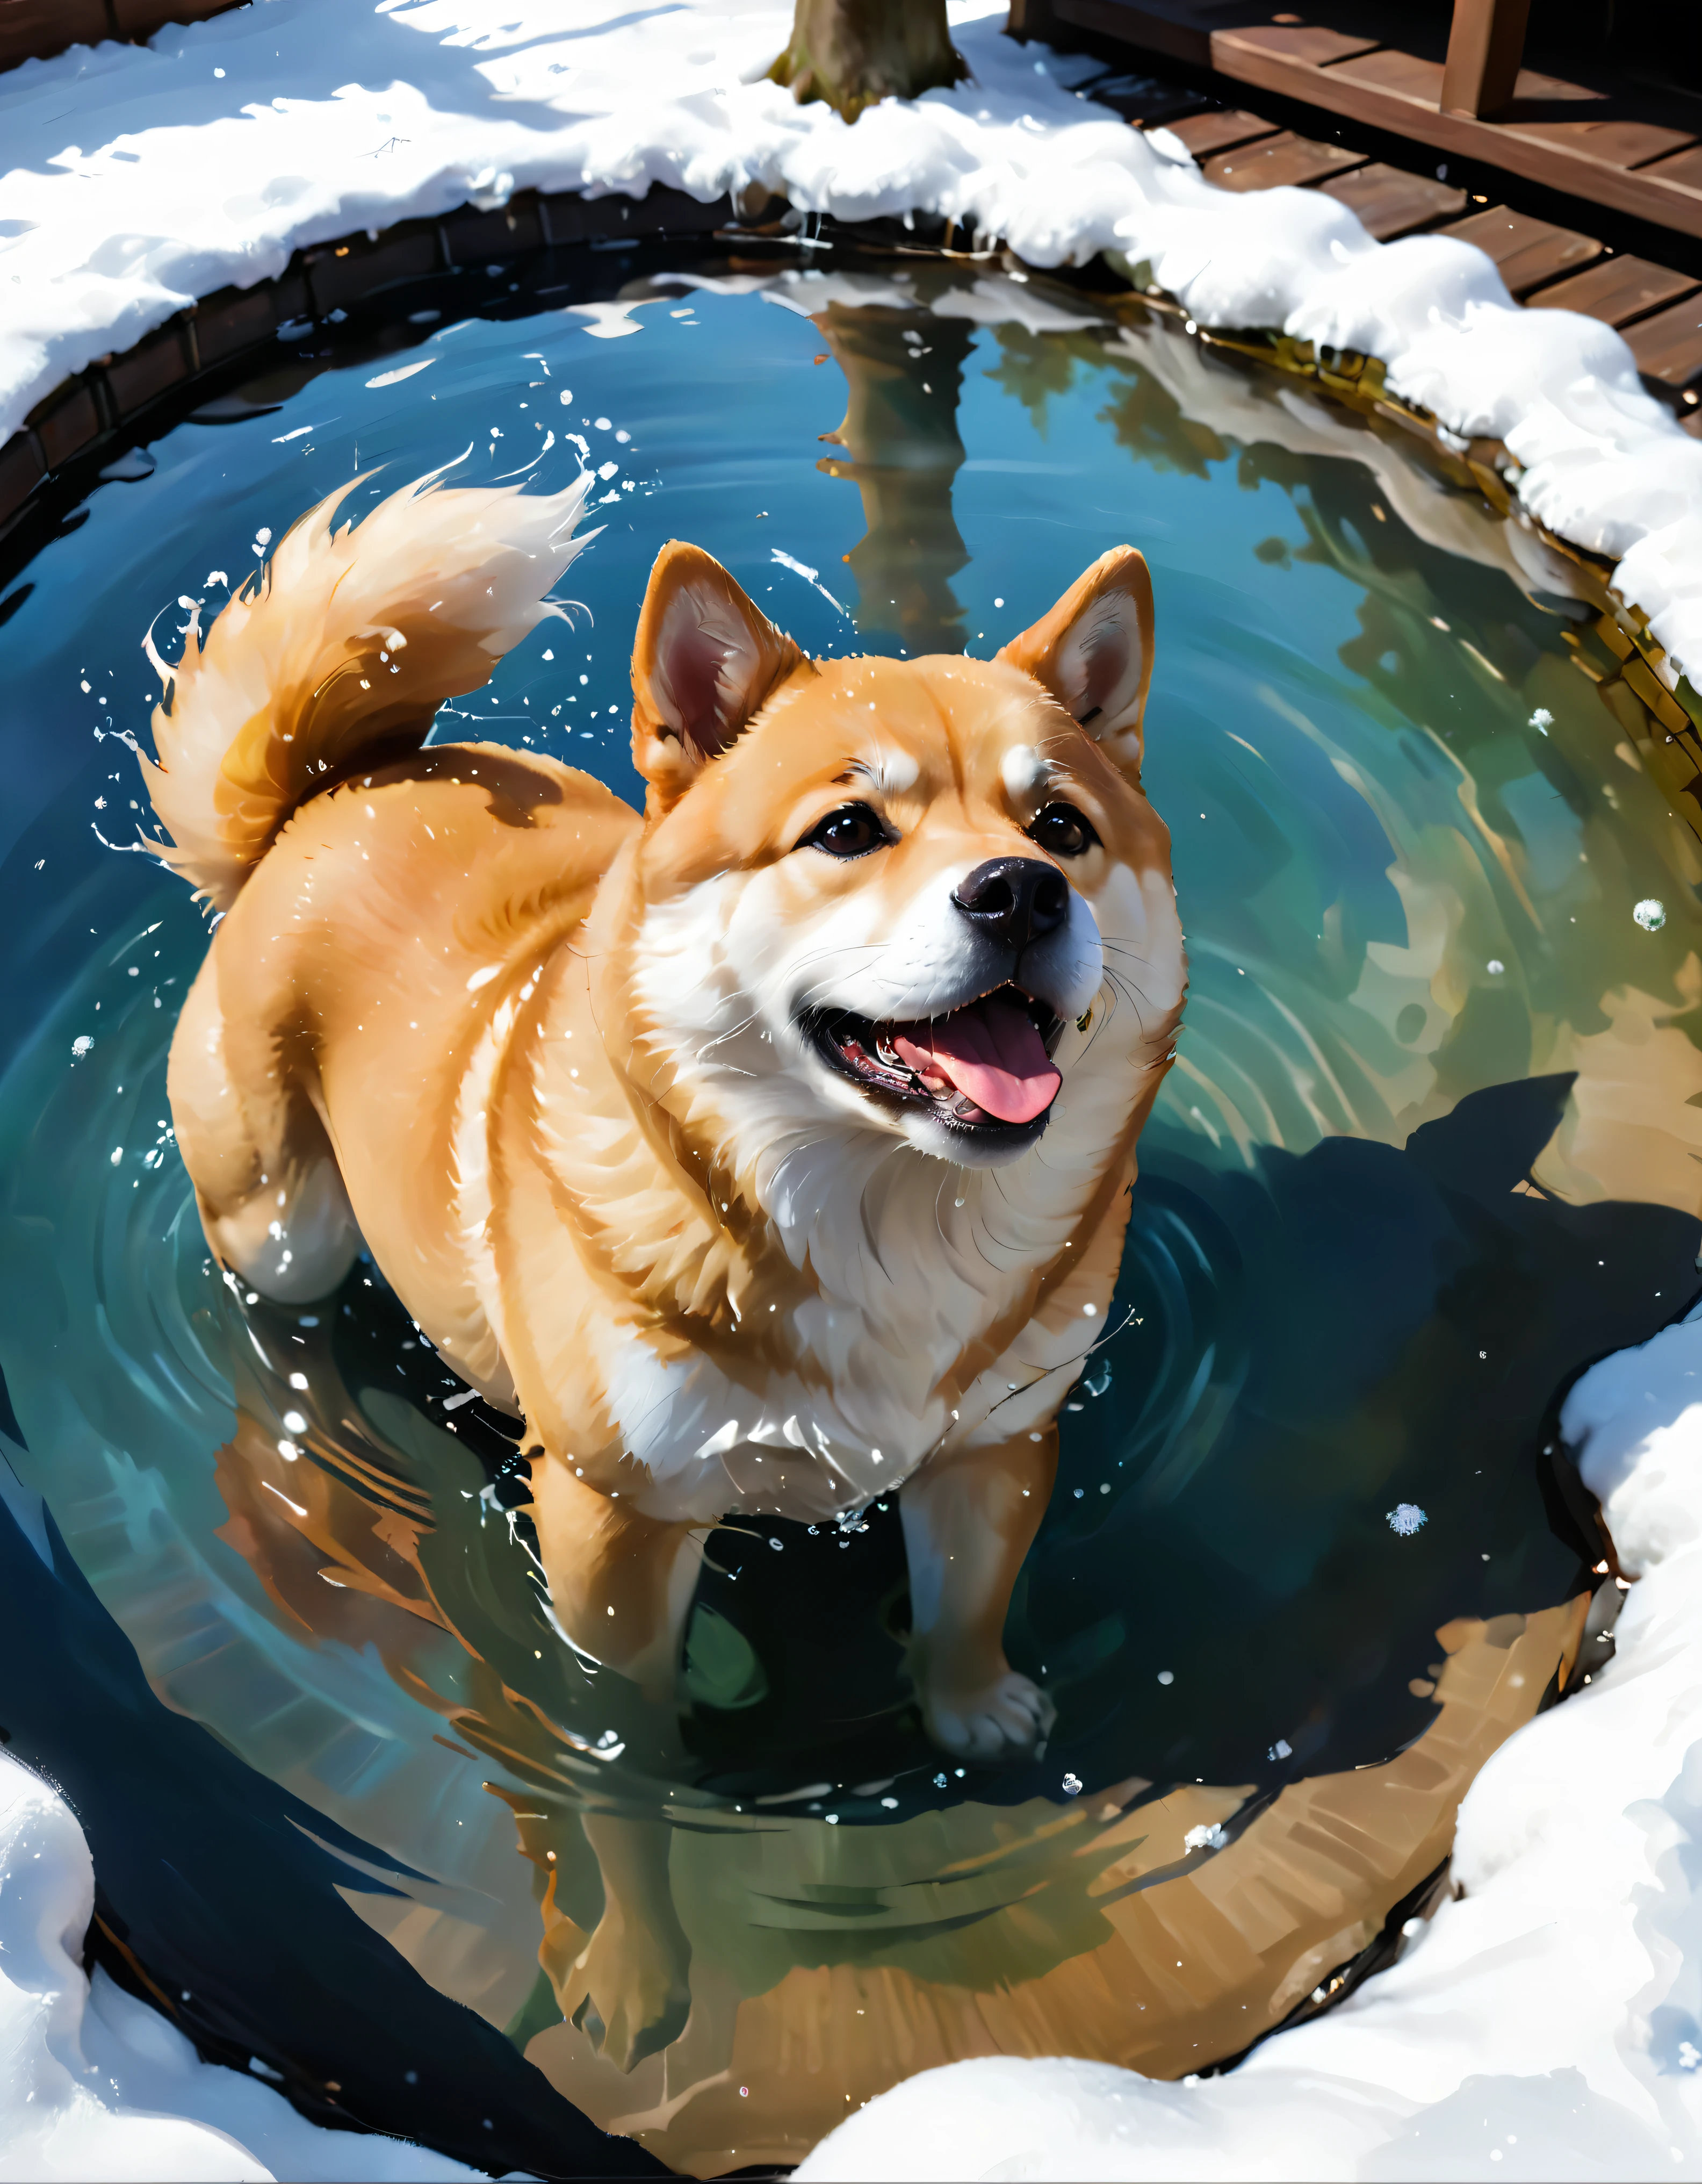 ((soft_color_painting:)1.5), ((soft_color_tones):1.4), ((crystal clear water reflection background):1.3), ((soft color cute shiba inu):1.4)),((macro view of a steaming japanese spa in snowy winter):1.2),((Movie-like still images and dynamic angles):1.3), ((cool and beautiful shadow silhouette):1.1), Gouache with intricate details, Add a touch of realism to this visually detailed and stylistically diverse masterpiece, Detailed brushstrokes have been enhanced, Careful brushwork creates an atmosphere, Utilize delicate yet powerful brushstroke techniques, Create an enchanting atmosphere. highly detailed gouache, ((Unparalleled sharpness and clarity):1.1), ((Radiosity rendered in stunning 32K resolution):1.3), All captured with sharp focus. Rendered in ultra-high definition with UHD and retina quality, this masterpiece ensures anatomical correctness and textured skin with super detail. With a focus on high quality and accuracy, this award-winning portrayal captures every nuance in stunning 16k resolution, immersing viewers in its lifelike depiction. | ((perfect_composition, perfect_design, perfect_layout, perfect_detail, ultra_detailed)), ((enhance_all, fix_everything)), More Detail, Enhance.